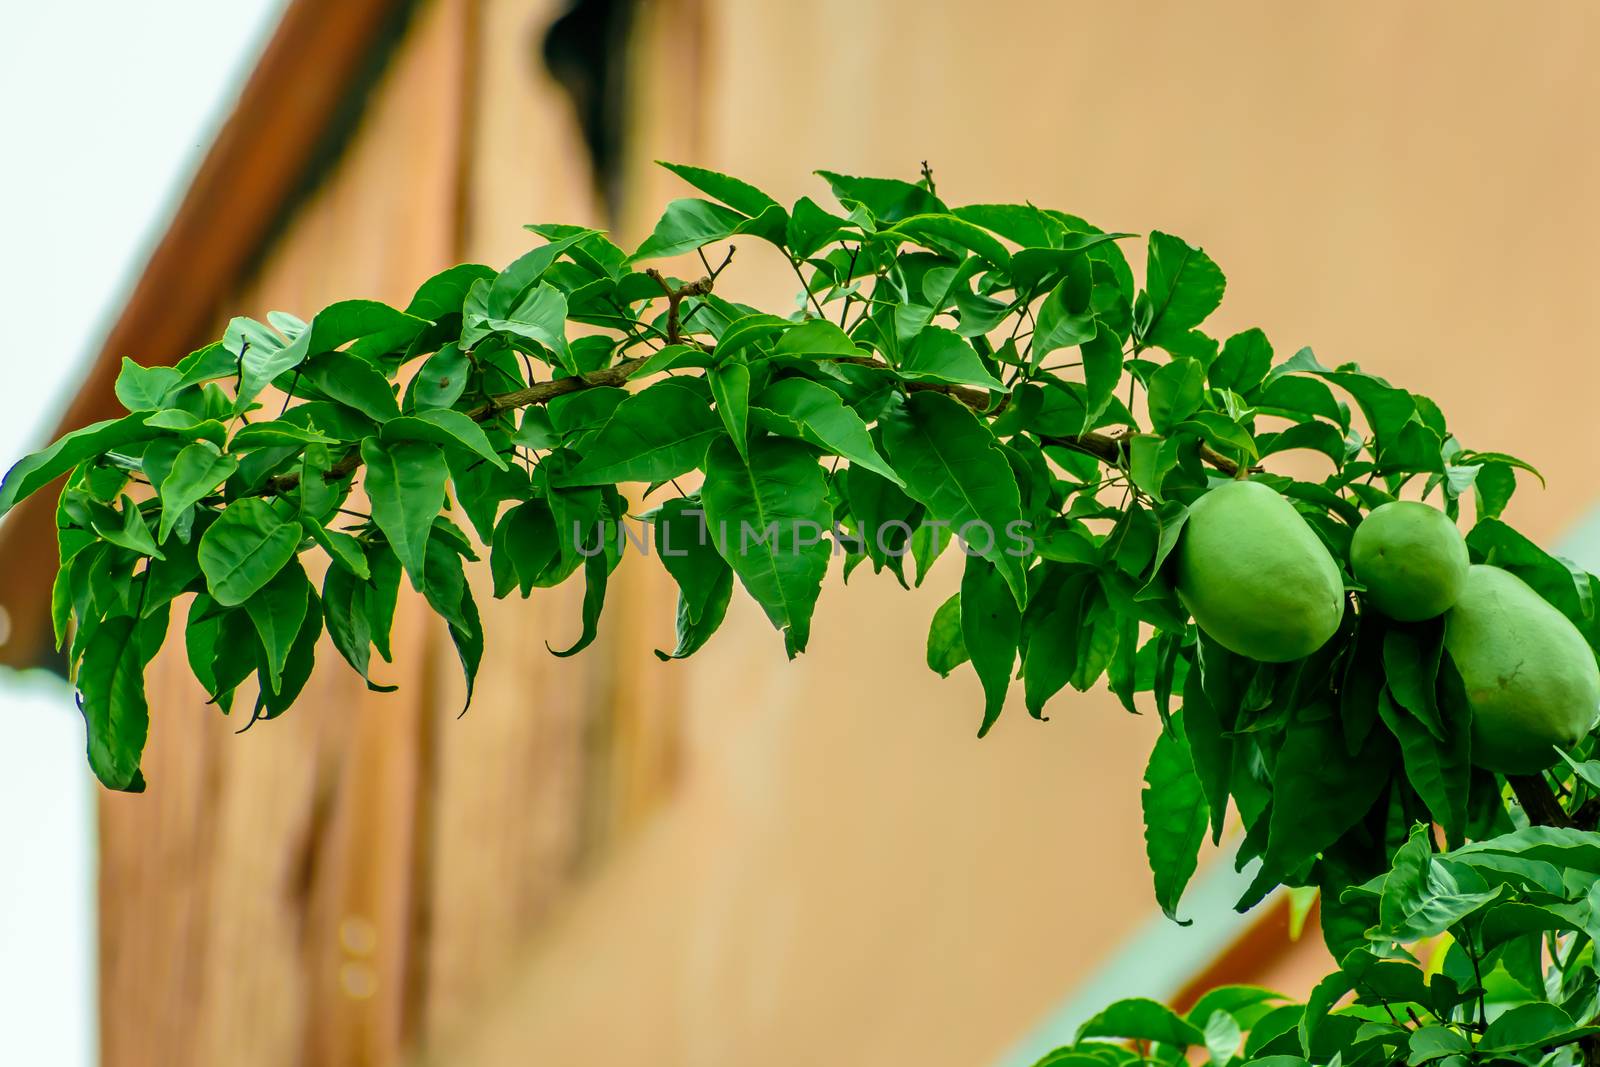 Ripe fruits grow on a branch among green leaves. by sudiptabhowmick